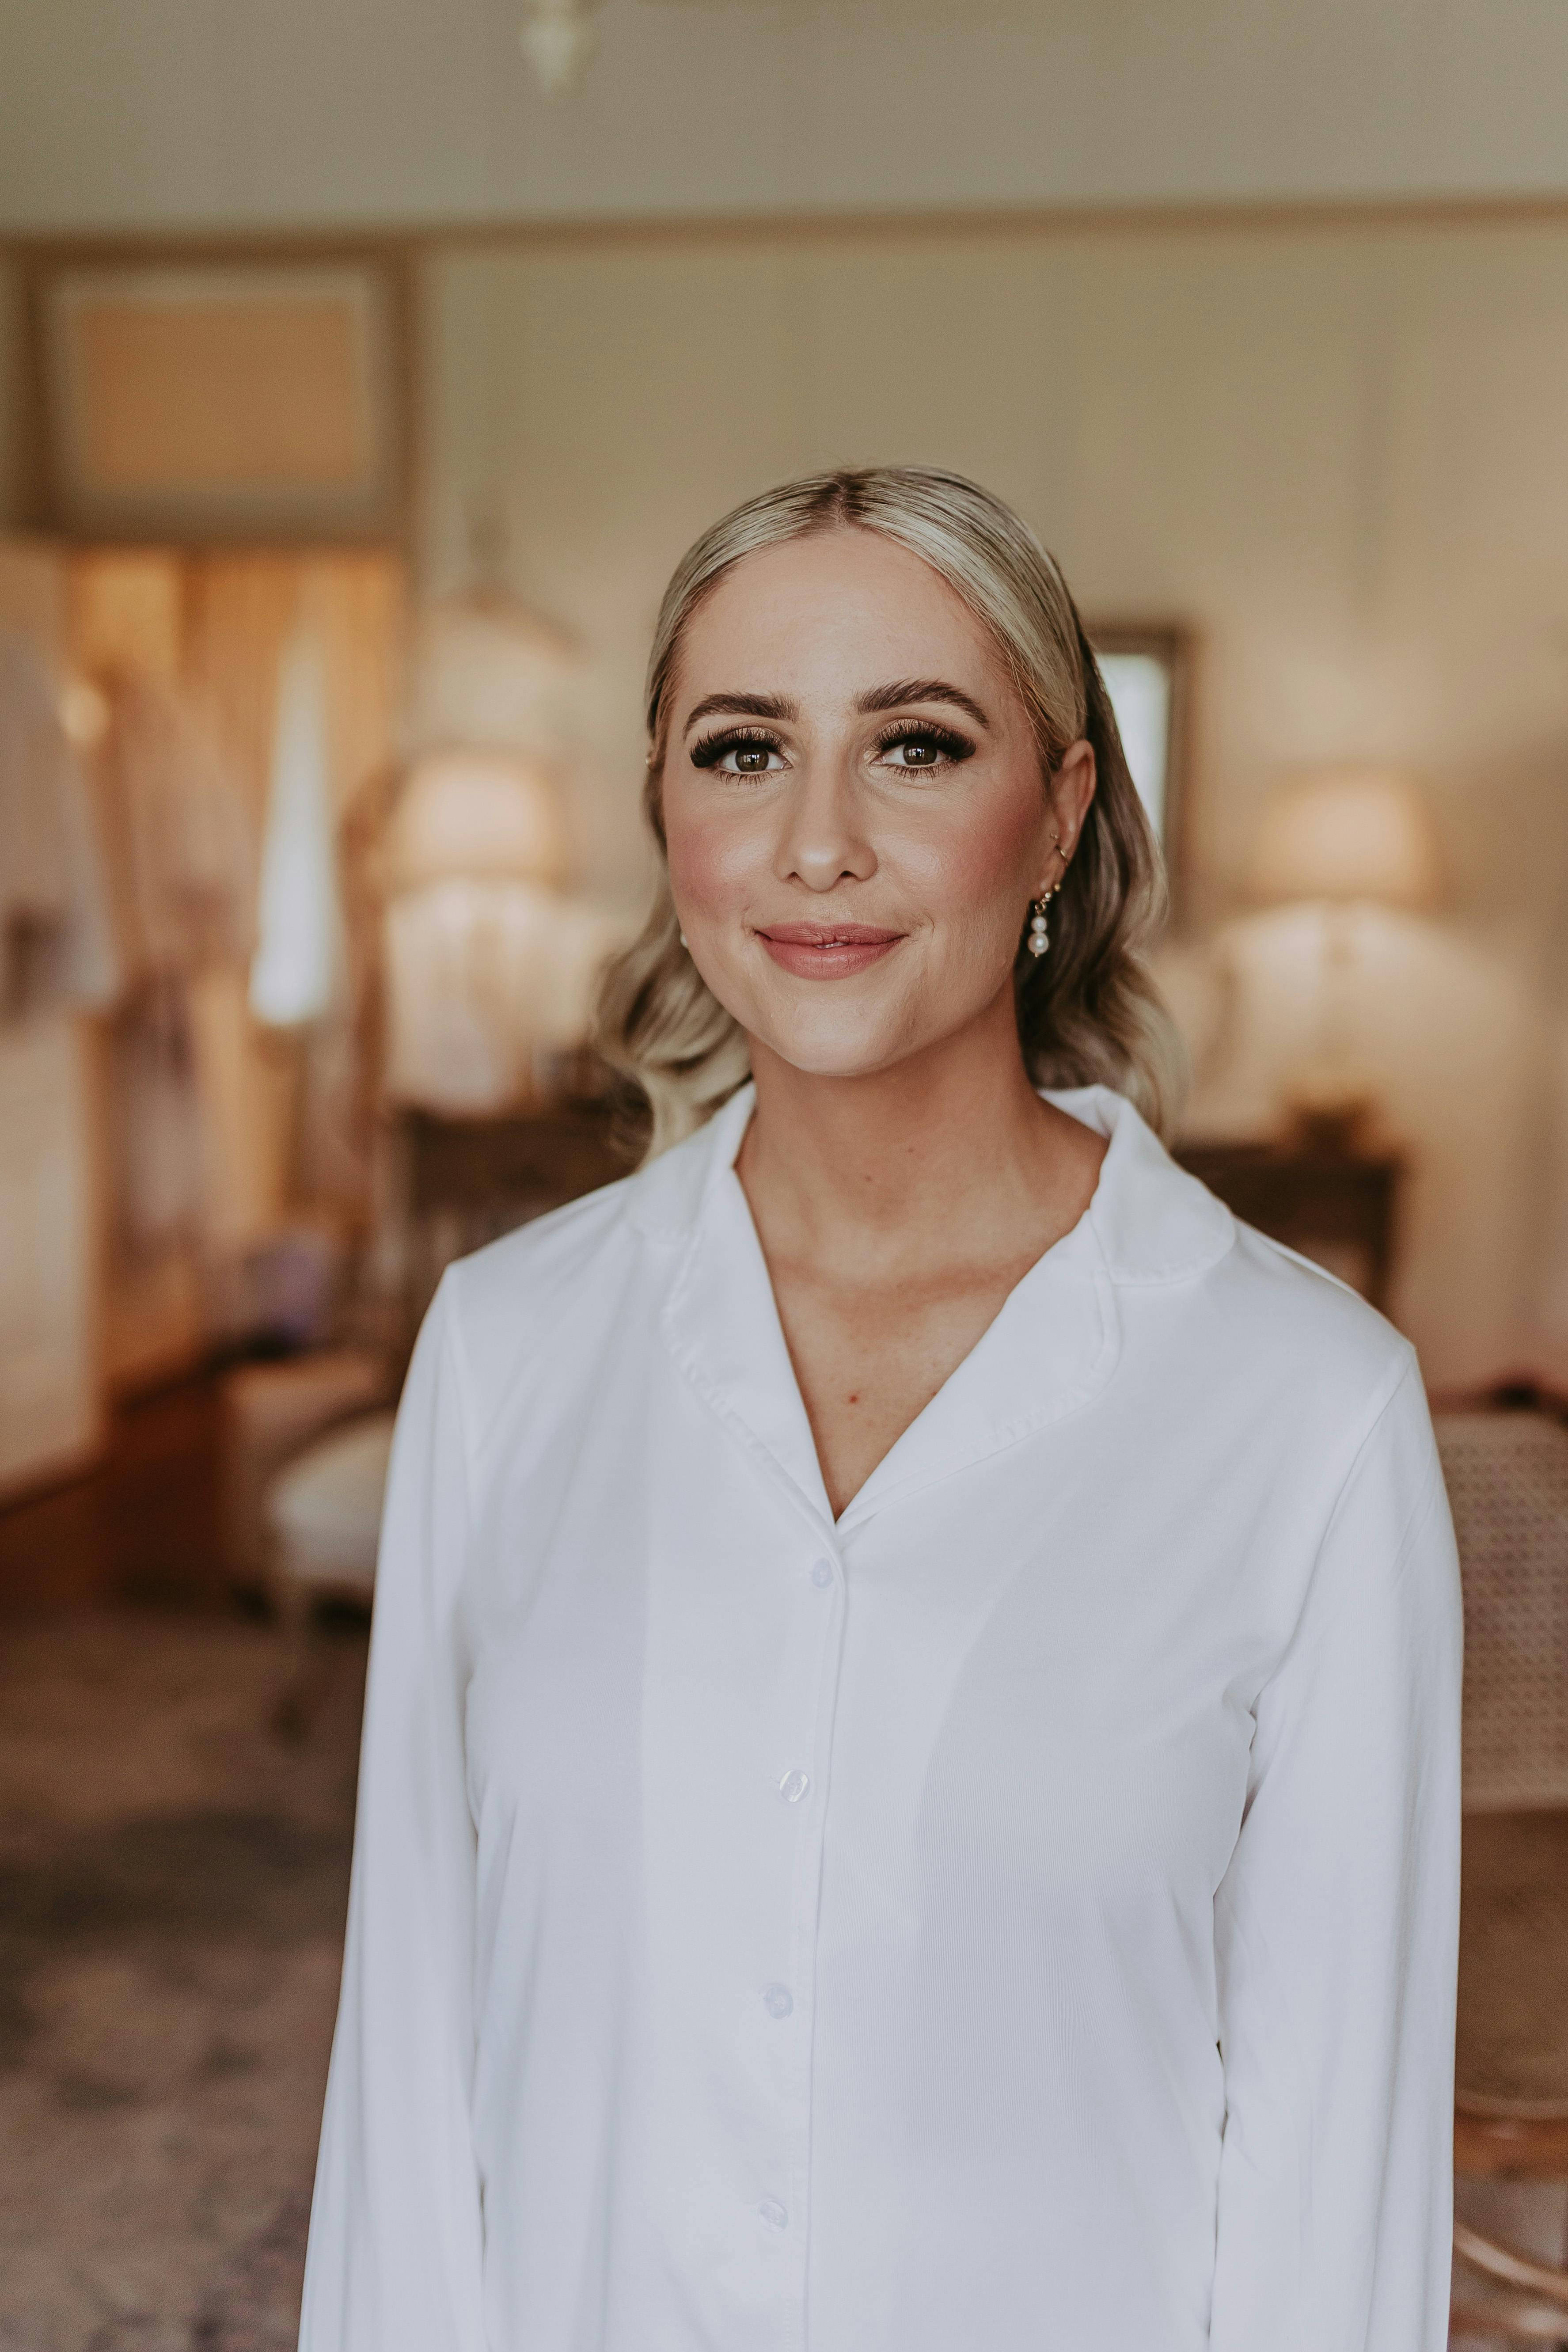 A woman with blonde hair styled in loose waves stands indoors wearing a white button-up shirt. She has a warm smile and is in a softly lit room with furniture and décor in the background.